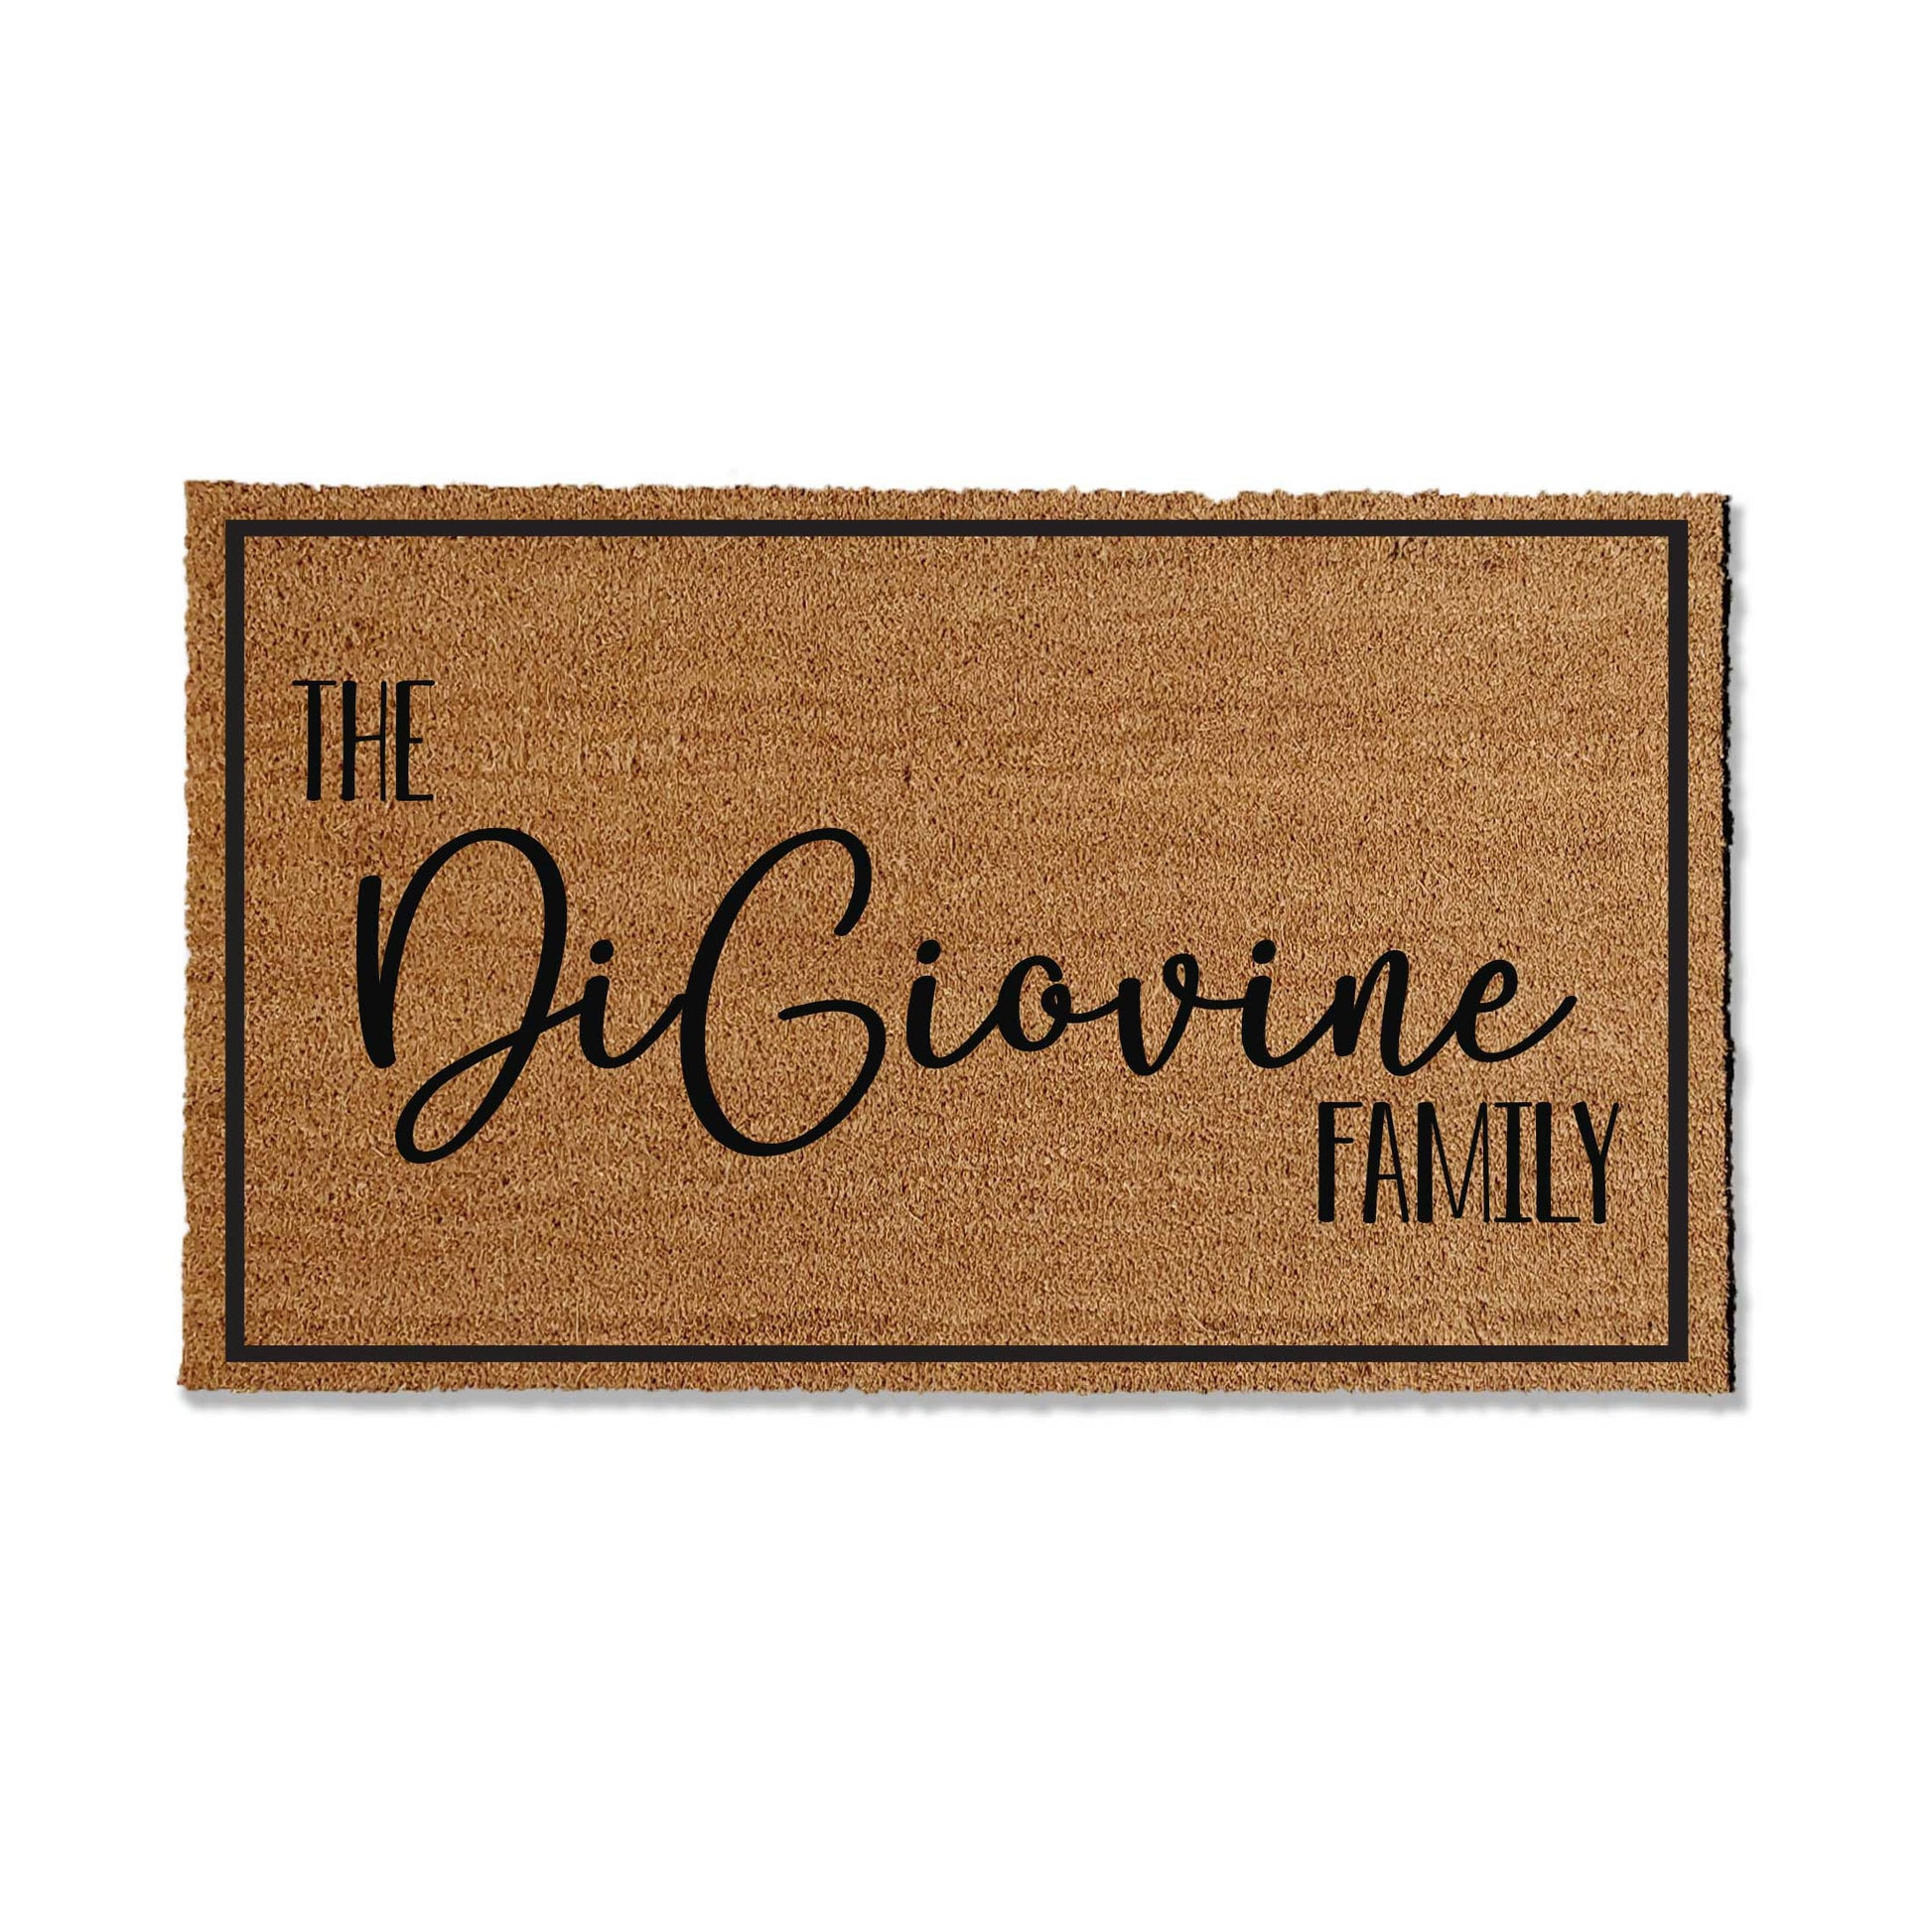 Custom coir doormat measuring 36 inches by 60 inches, featuring a personalized design or message. Made from natural coir fibers for durability and a classic look. Perfect for adding a welcoming touch to your entryway.